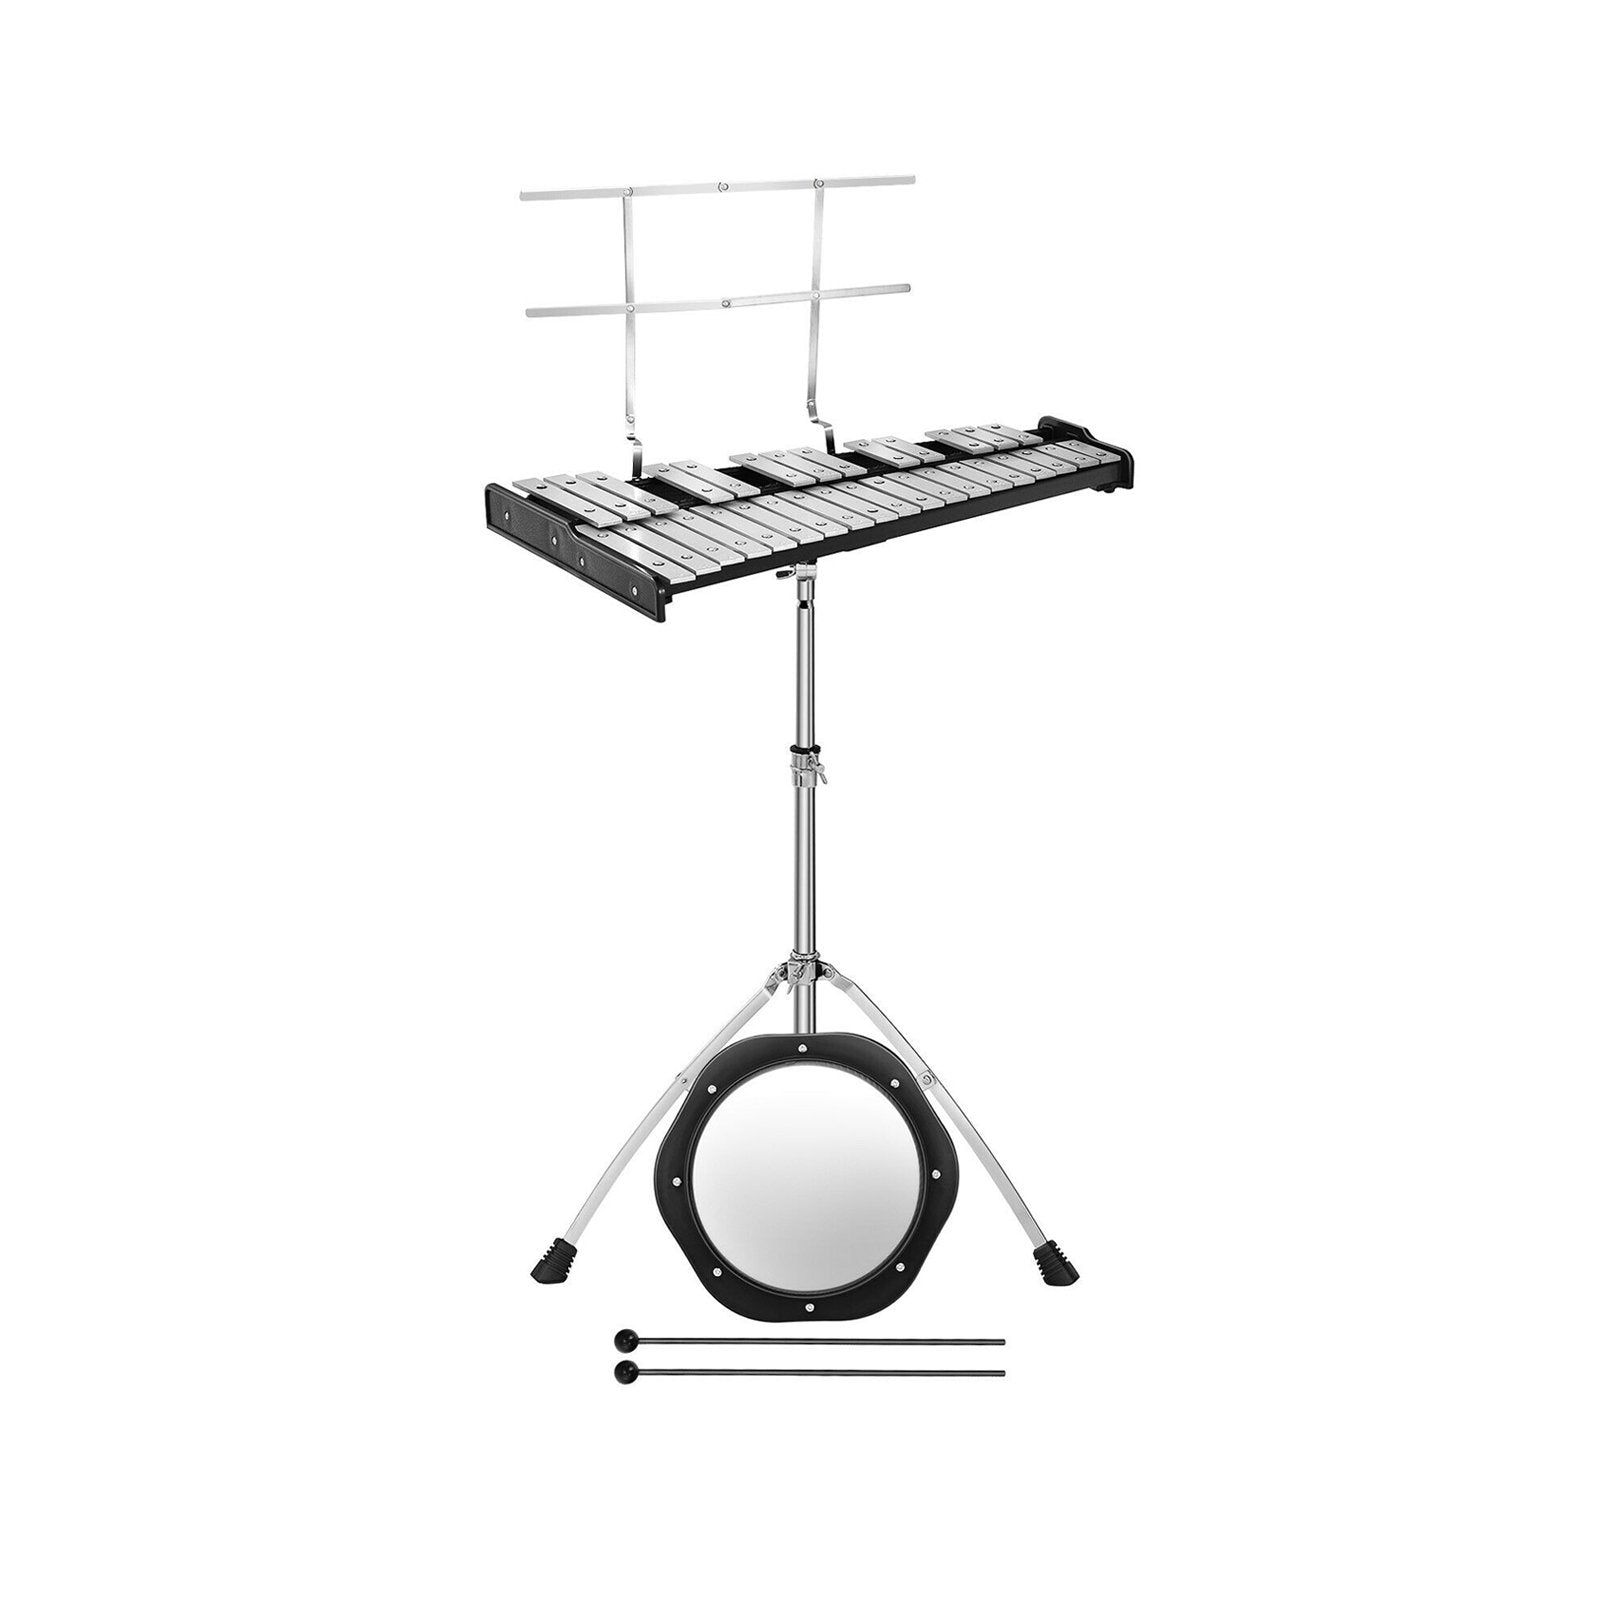 32 Note Glockenspiel Xylophone Percussion Bell Kit with Adjustable Stand, Black at Gallery Canada